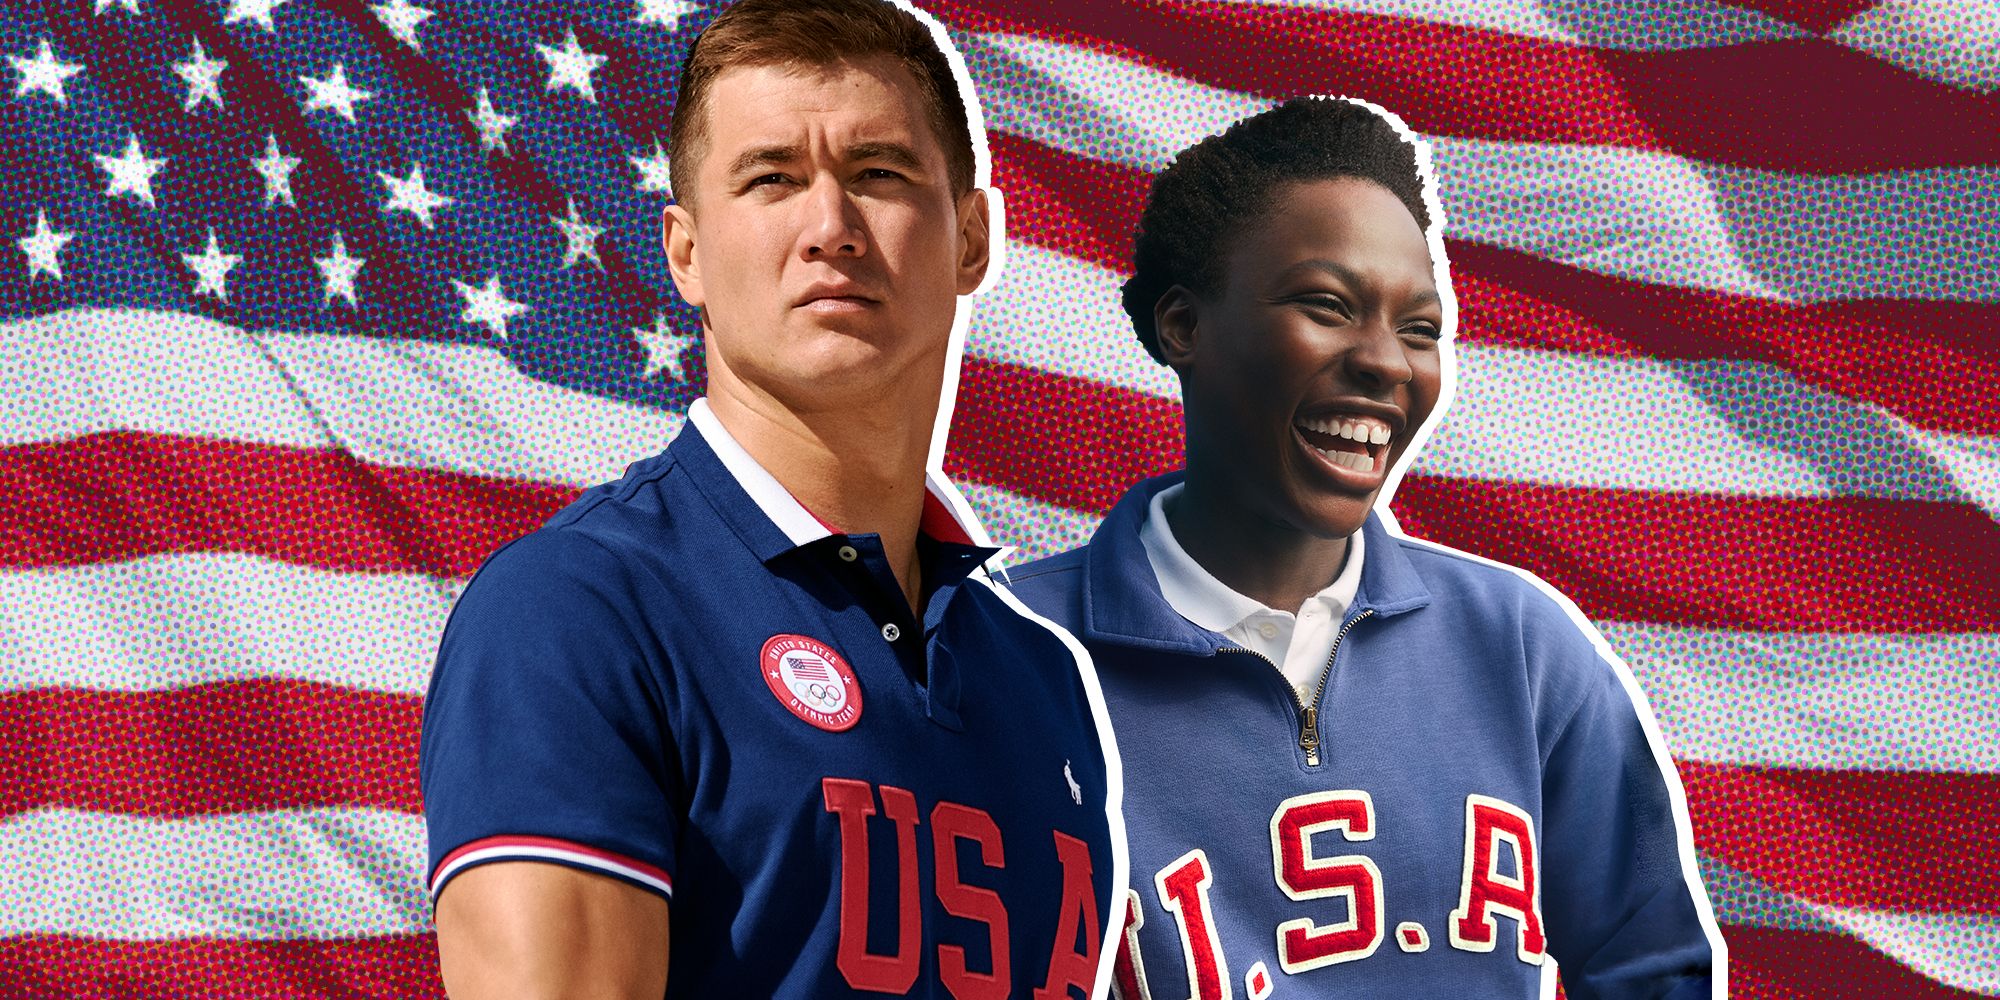 Ralph Lauren's New Clothing Collection Supports Olympic Athletes